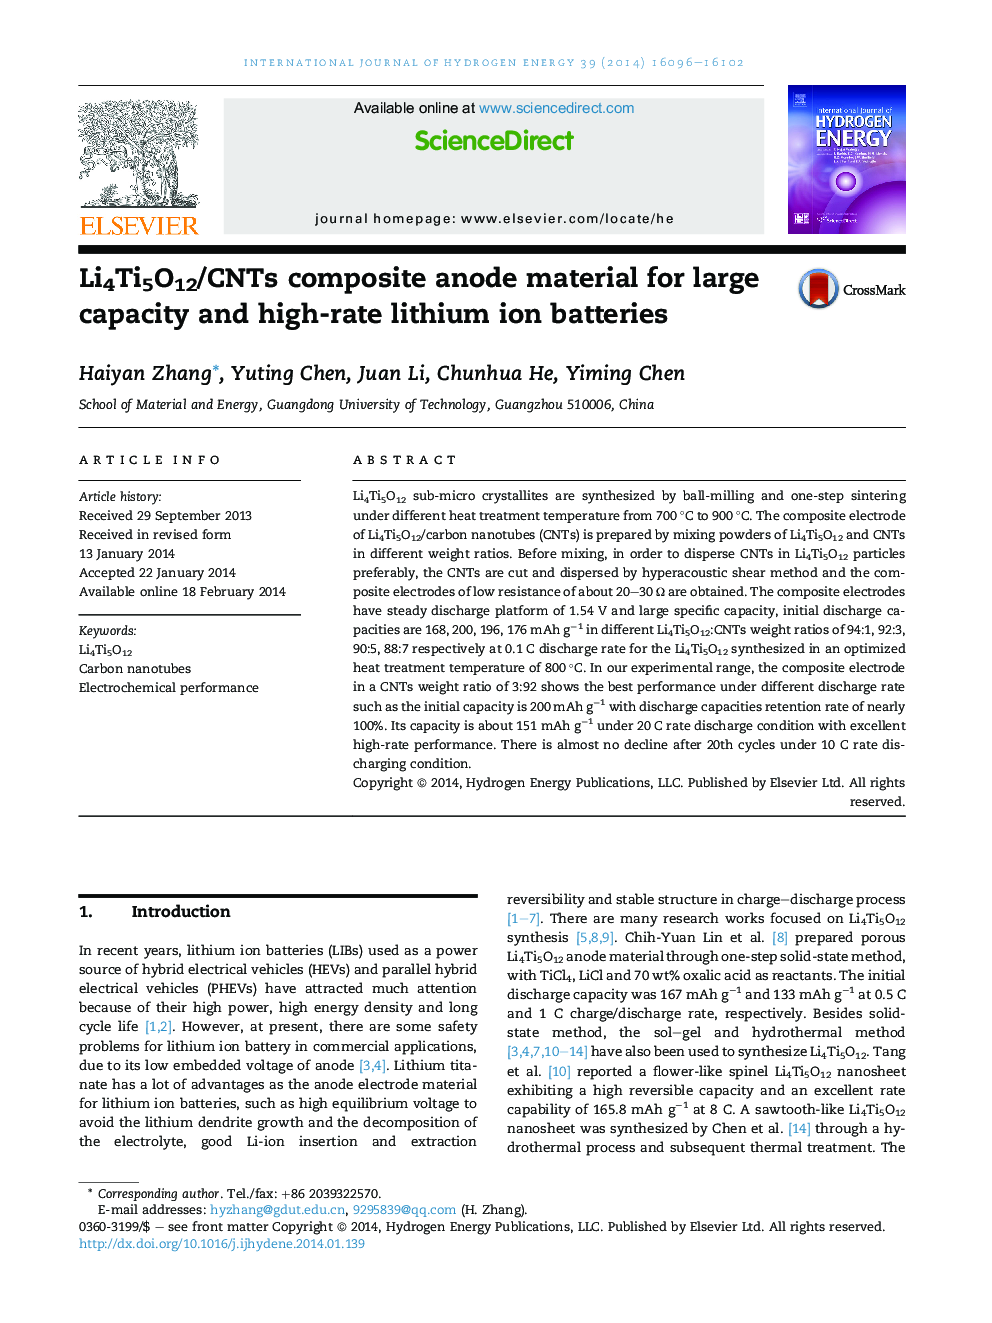 Li4Ti5O12/CNTs composite anode material for large capacity and high-rate lithium ion batteries